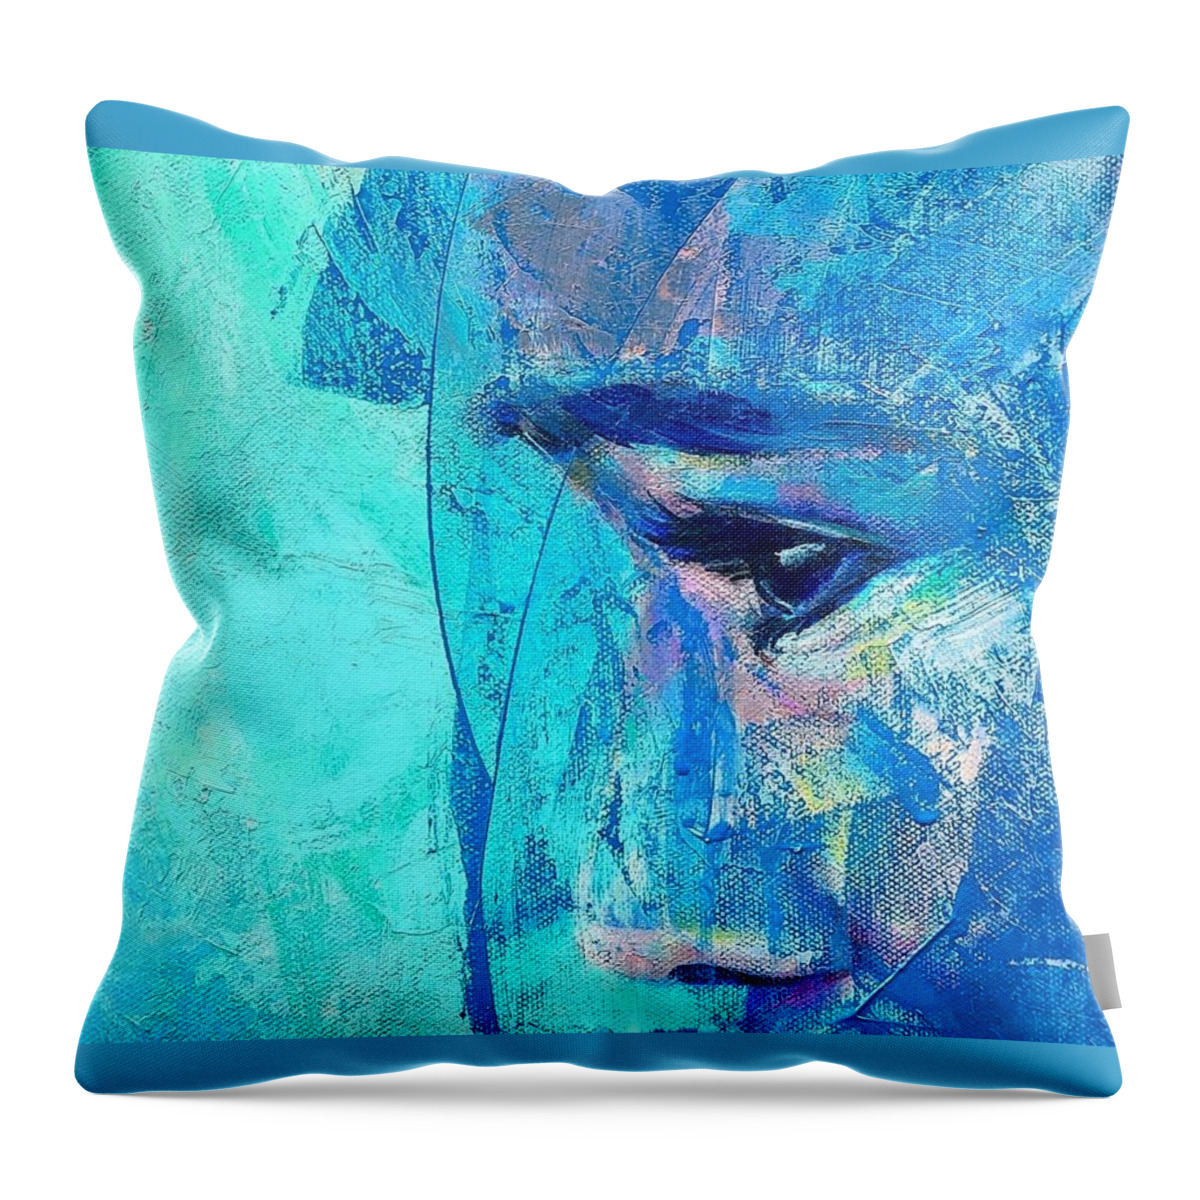 Veil Throw Pillow featuring the painting Veil by Luzdy Rivera